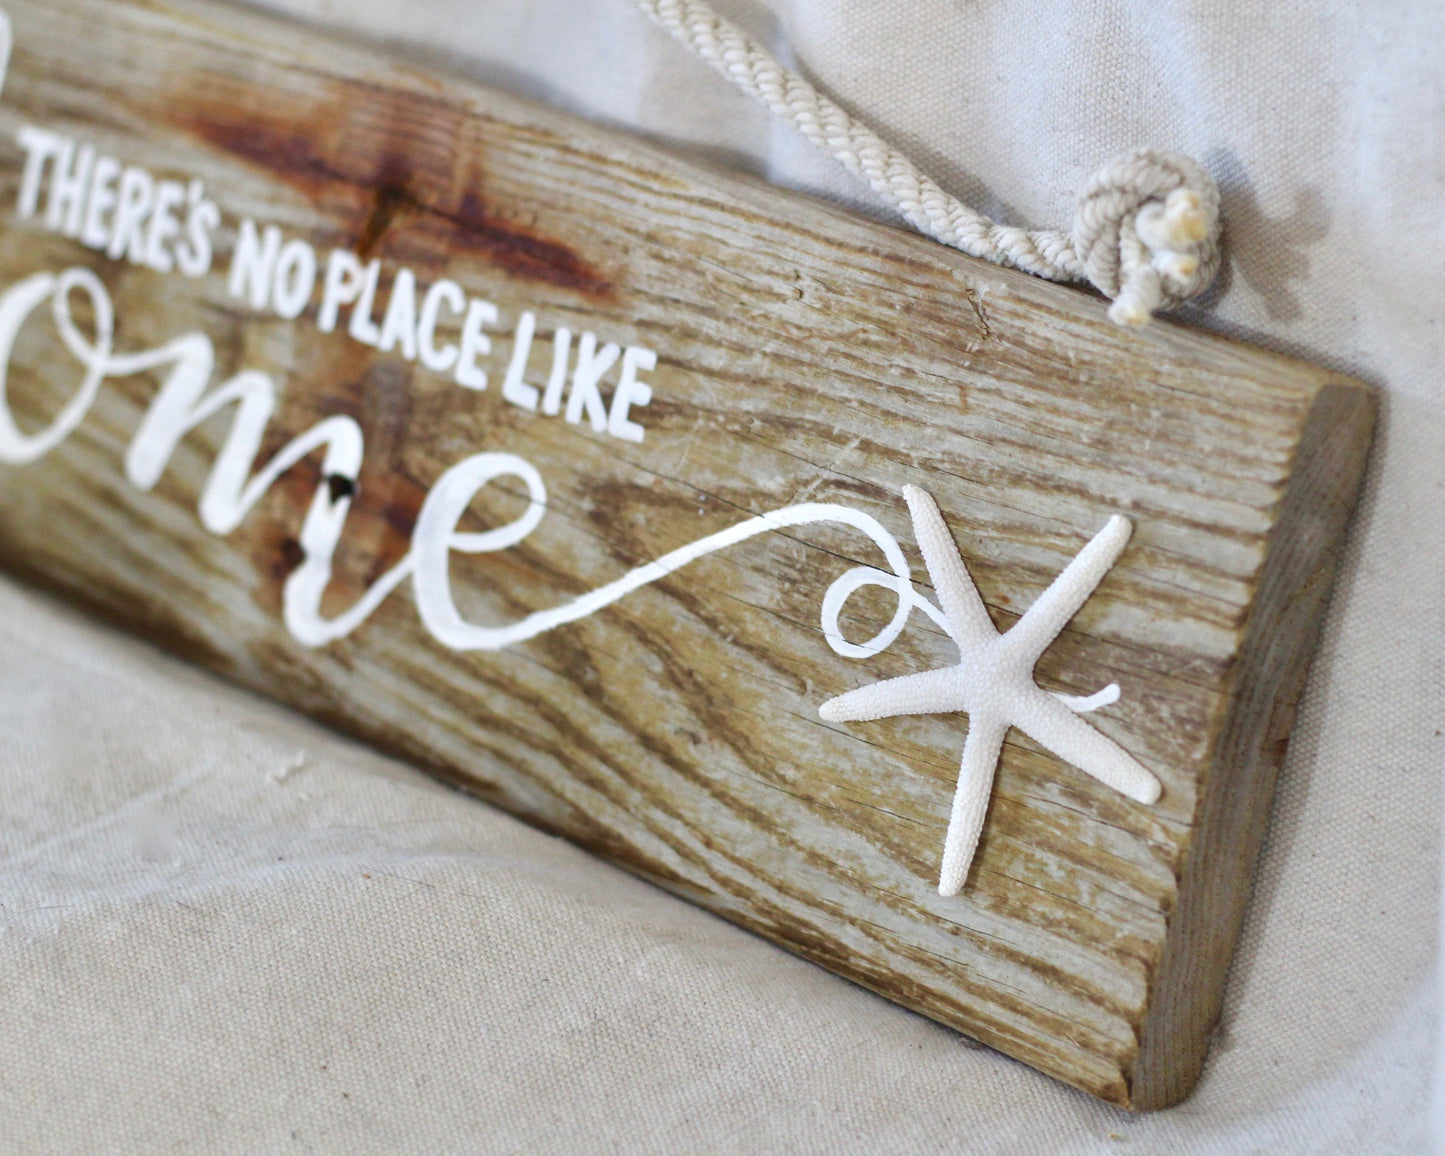 Custom Driftwood Sign with a Starfish and a Fishing Rope Hanger - Beach Inspired Hand Lettered Sign